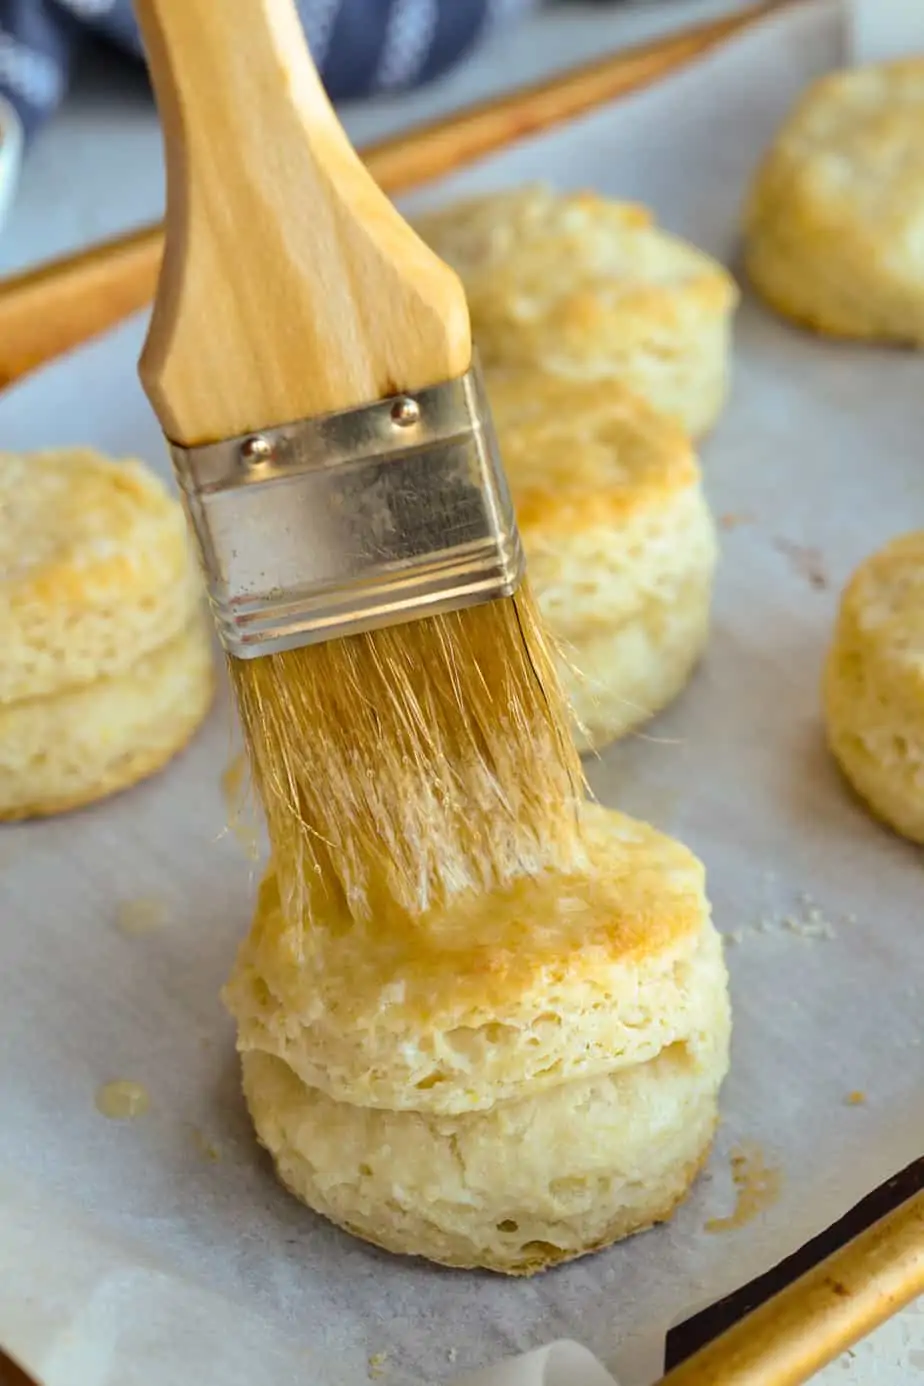 There is nothing better than warm flaky buttermilk homemade biscuits.